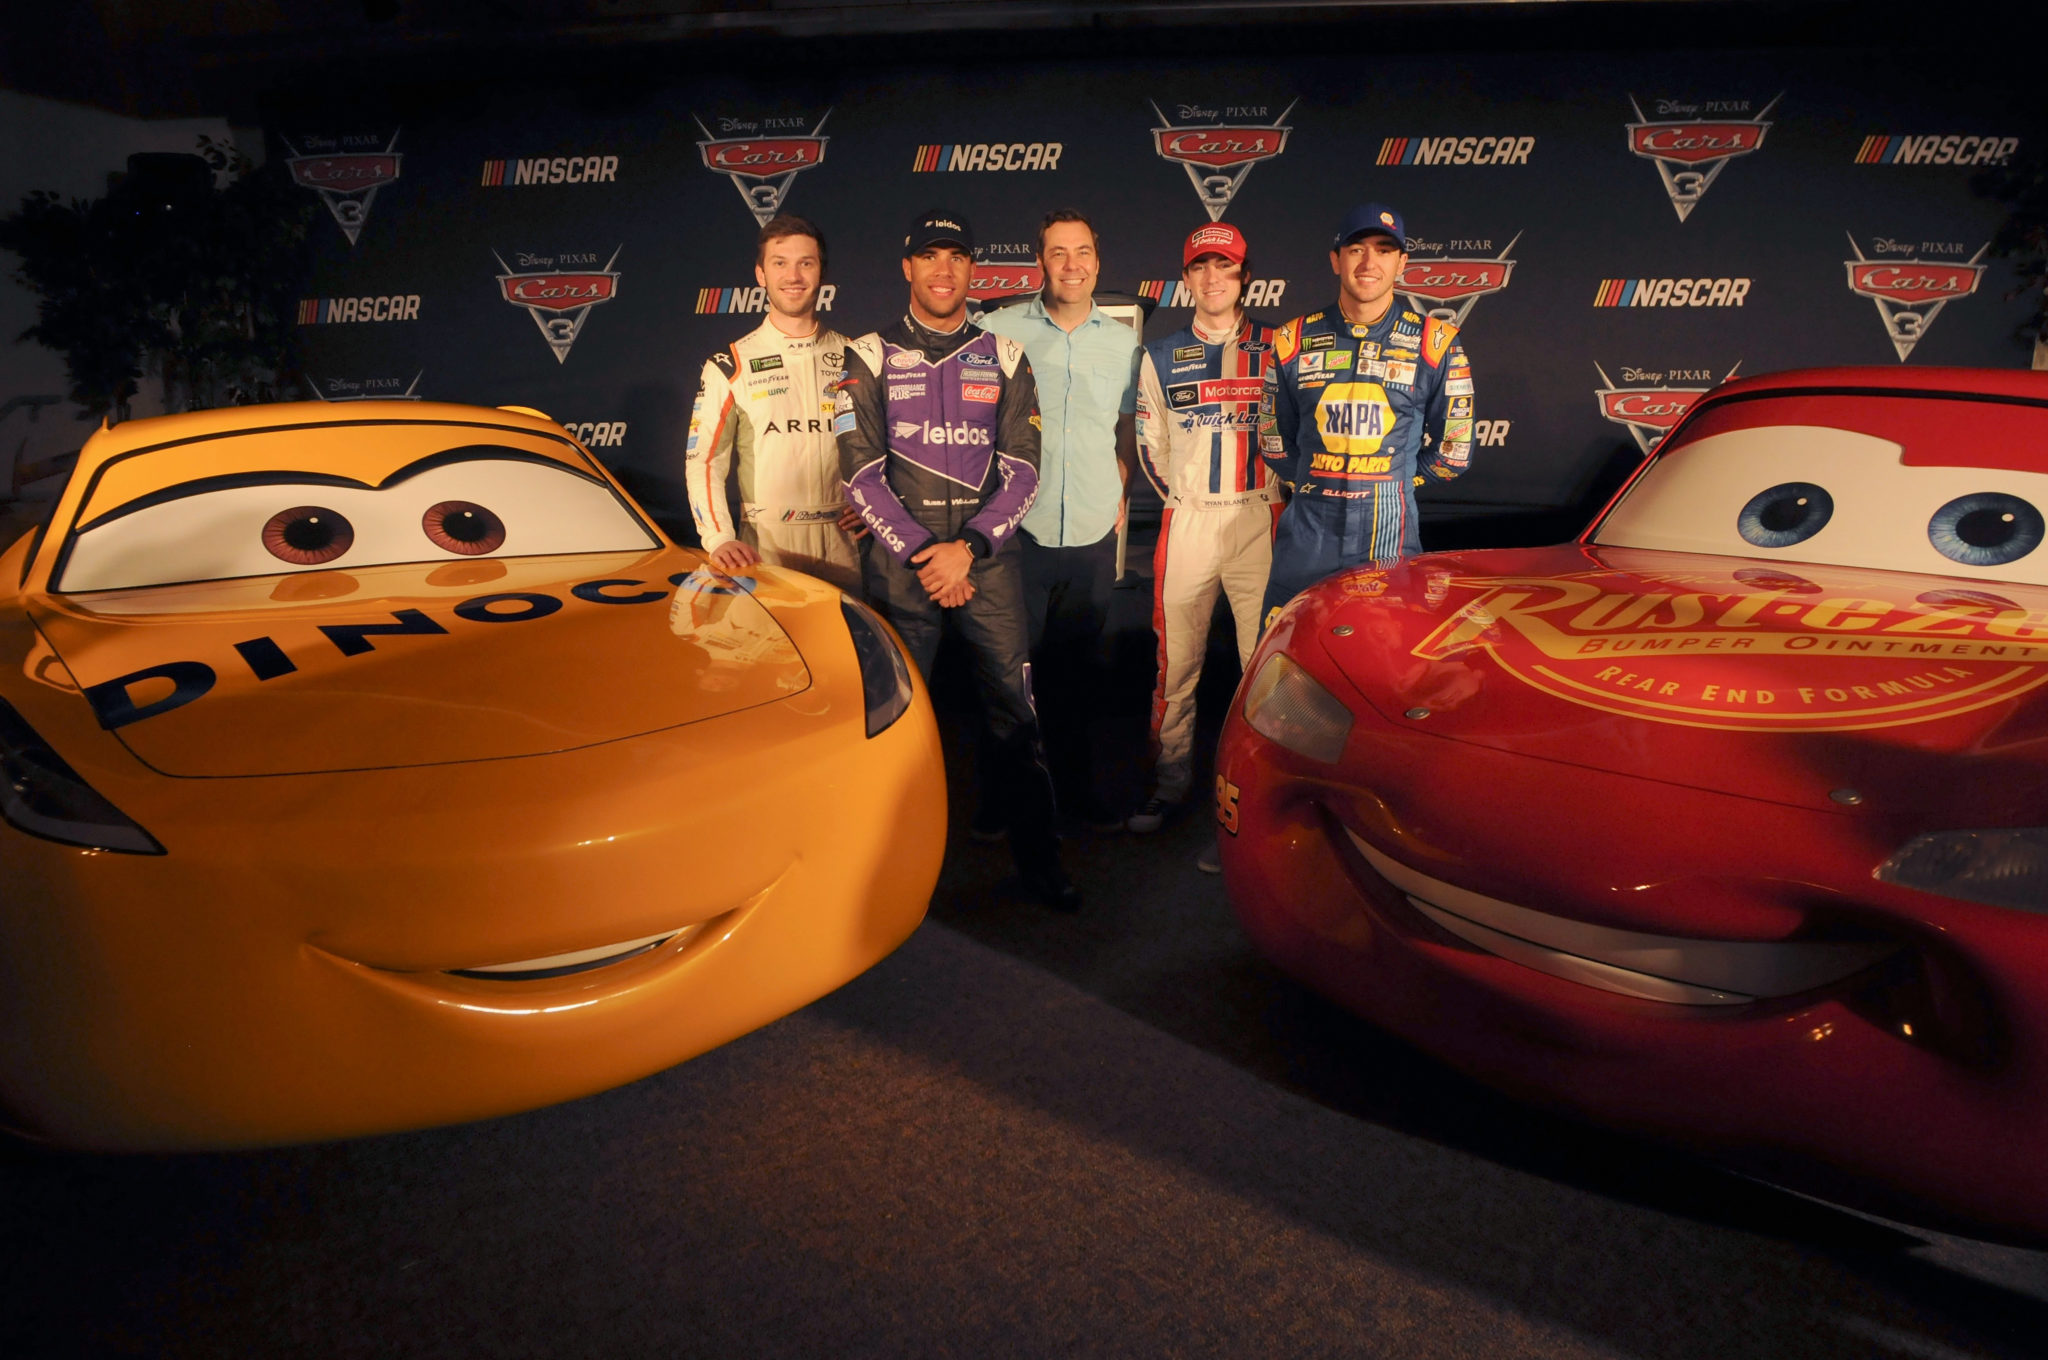 “Cars 3” Gears Up For a Season-Long Ride With NASCAR